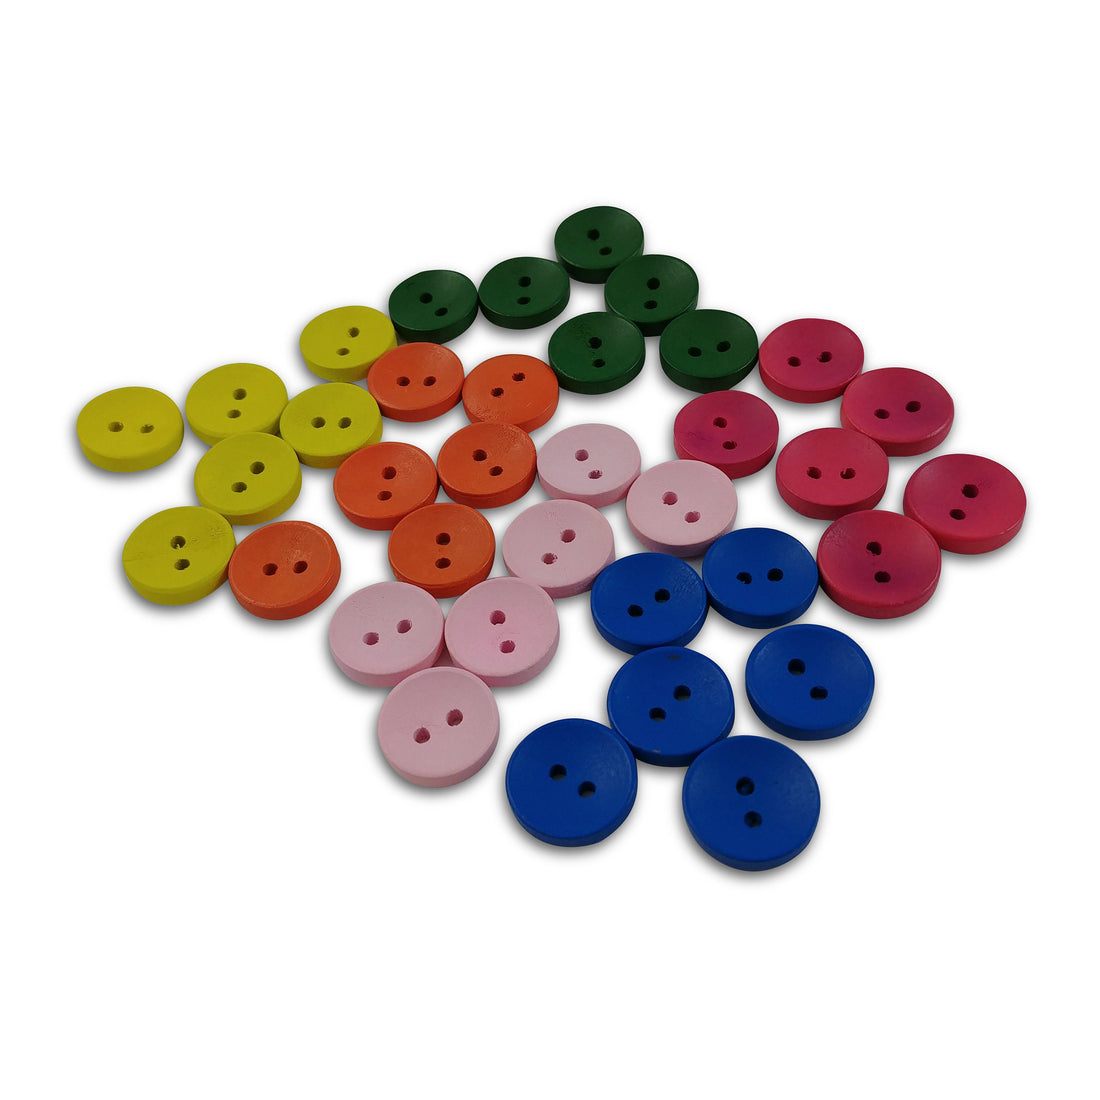 15mm wooden colorful buttons - Set of 6 wood button - Choose your color